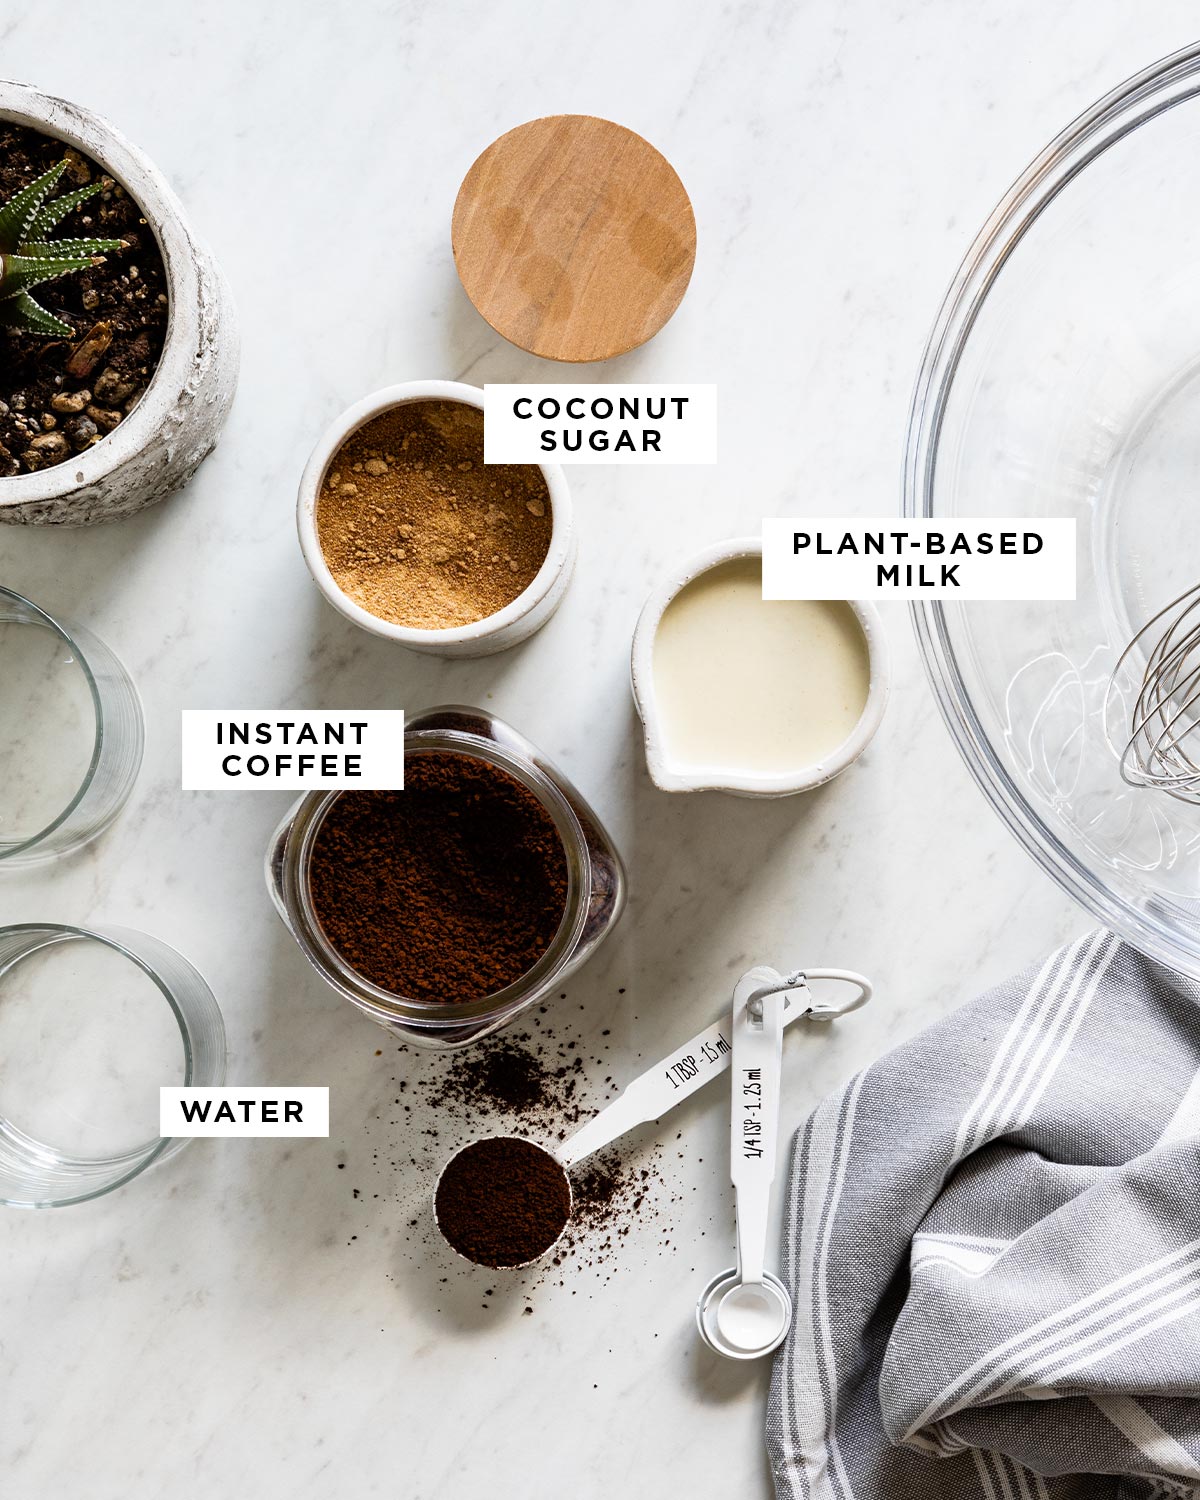 labeled ingredients for dalgona coffee recipe including coconut sugar, plant-based milk, instant coffee and water.